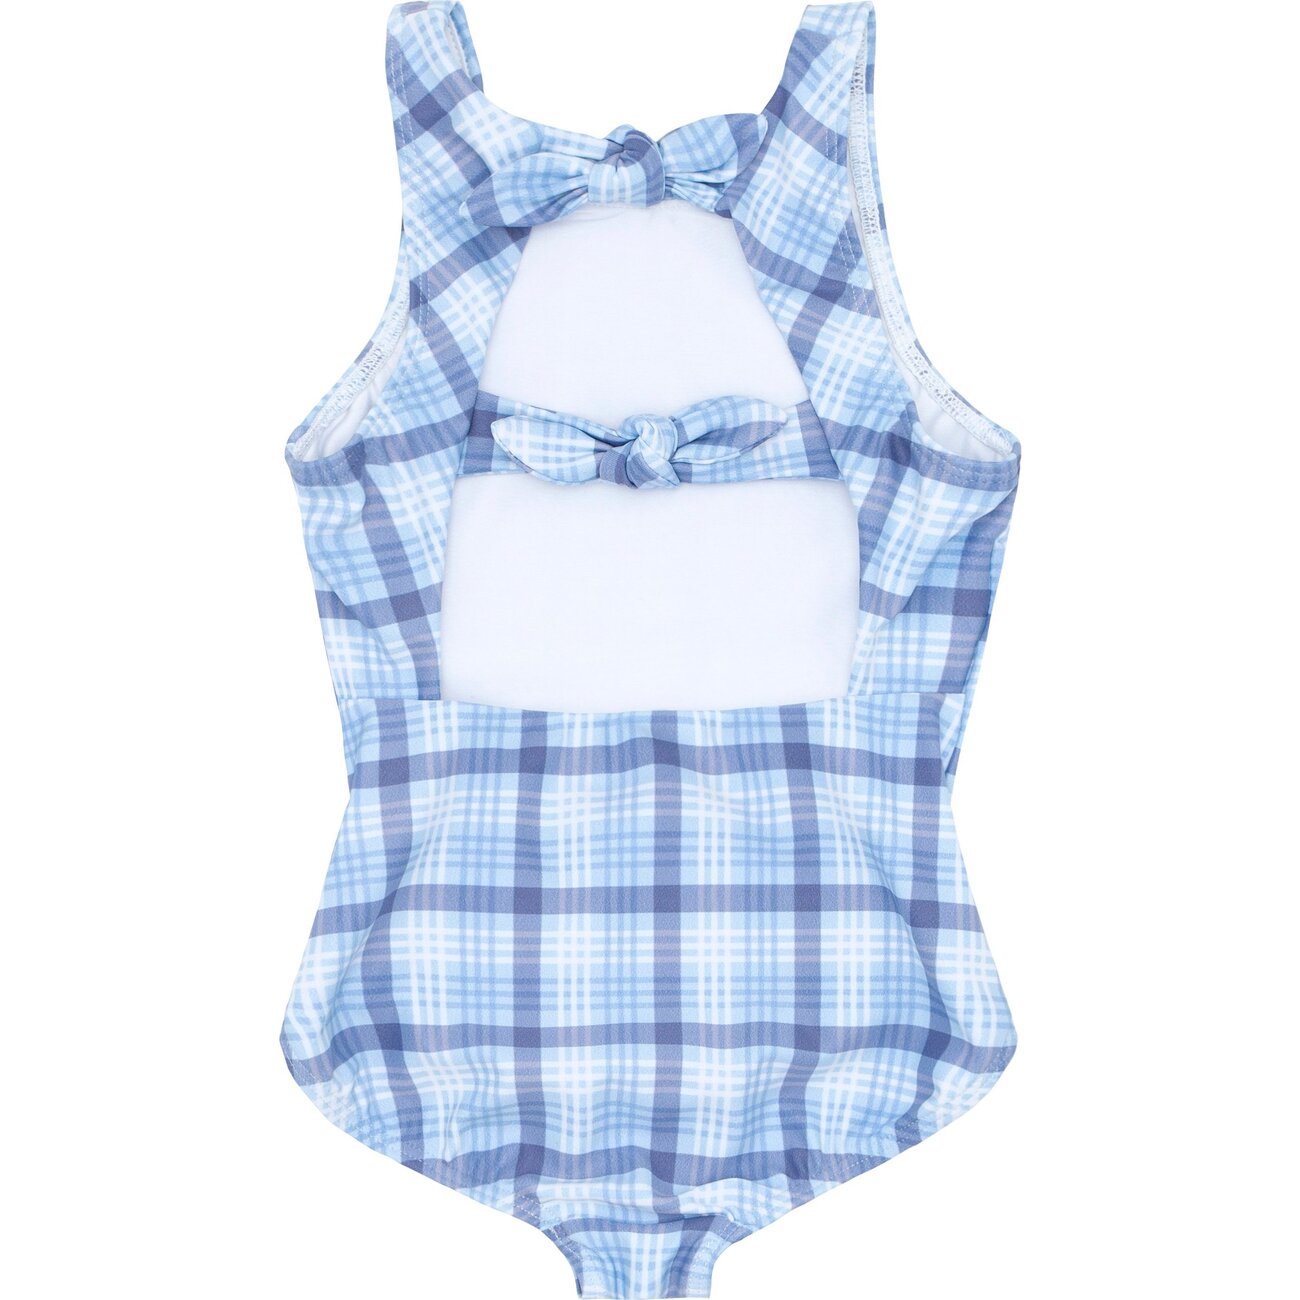 Plaid One Piece Bathing Suit - Designed By Squeaky Chimp T-shirts